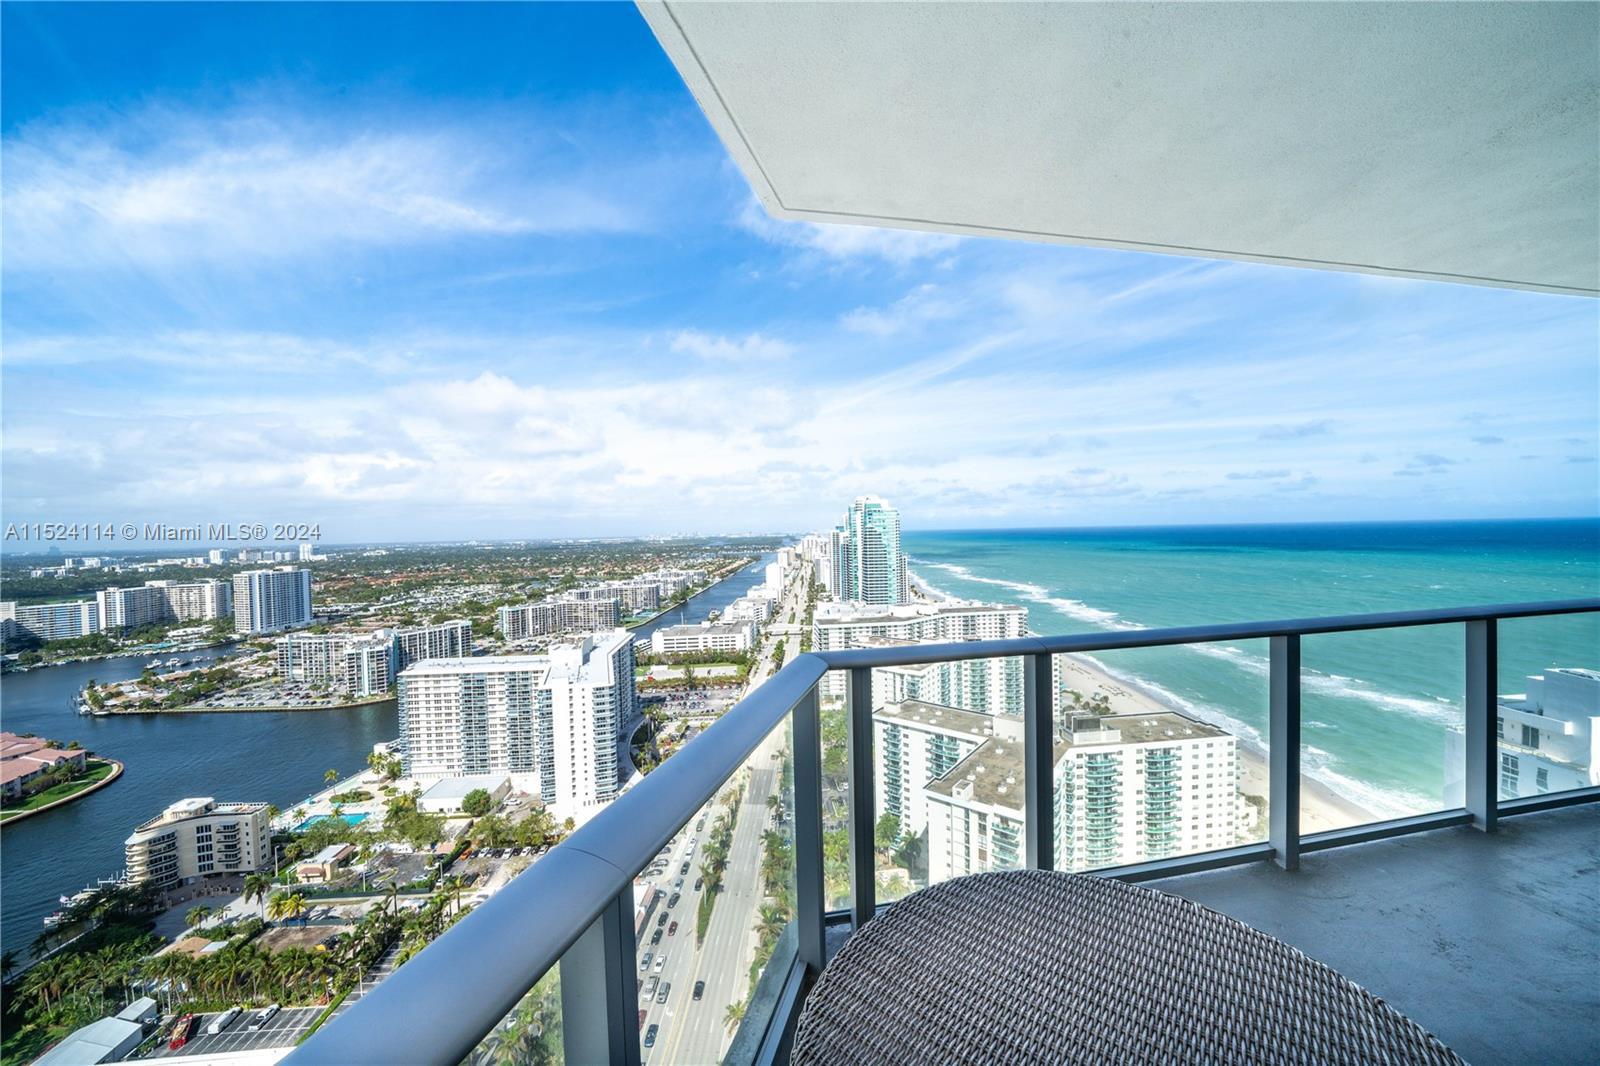 Photo of 4111 S Ocean Dr #3112 in Hollywood, FL